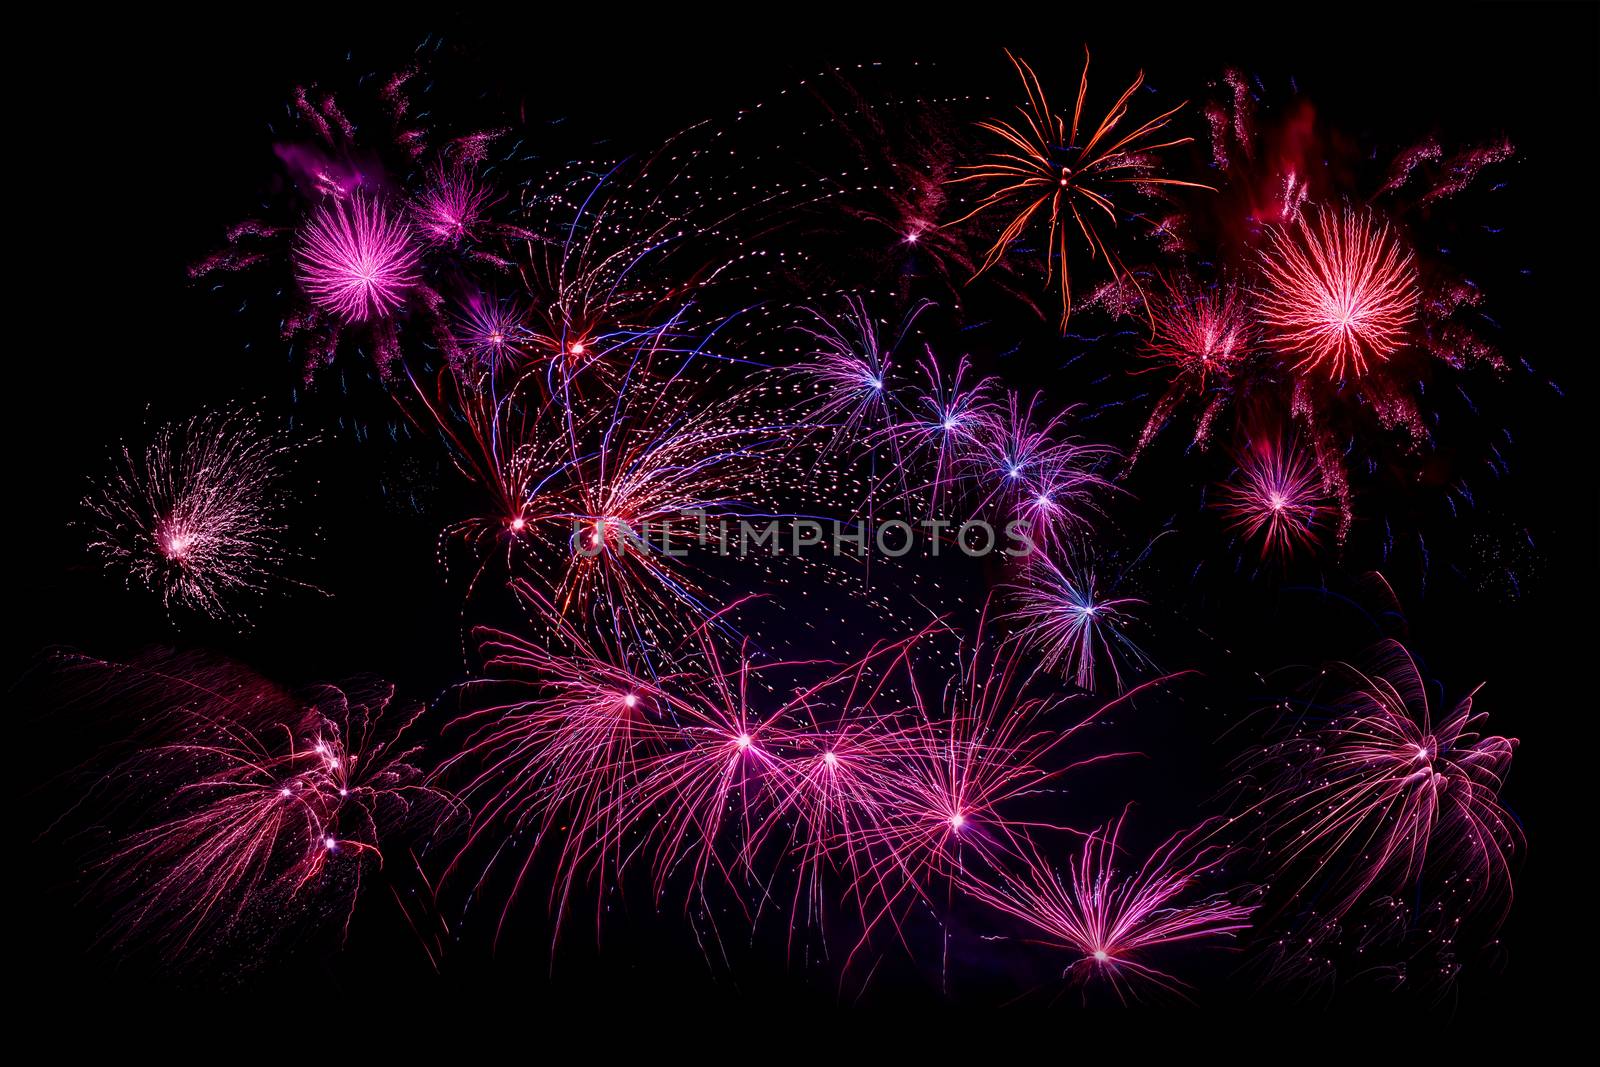 Fireworks in violet colors by Sportactive